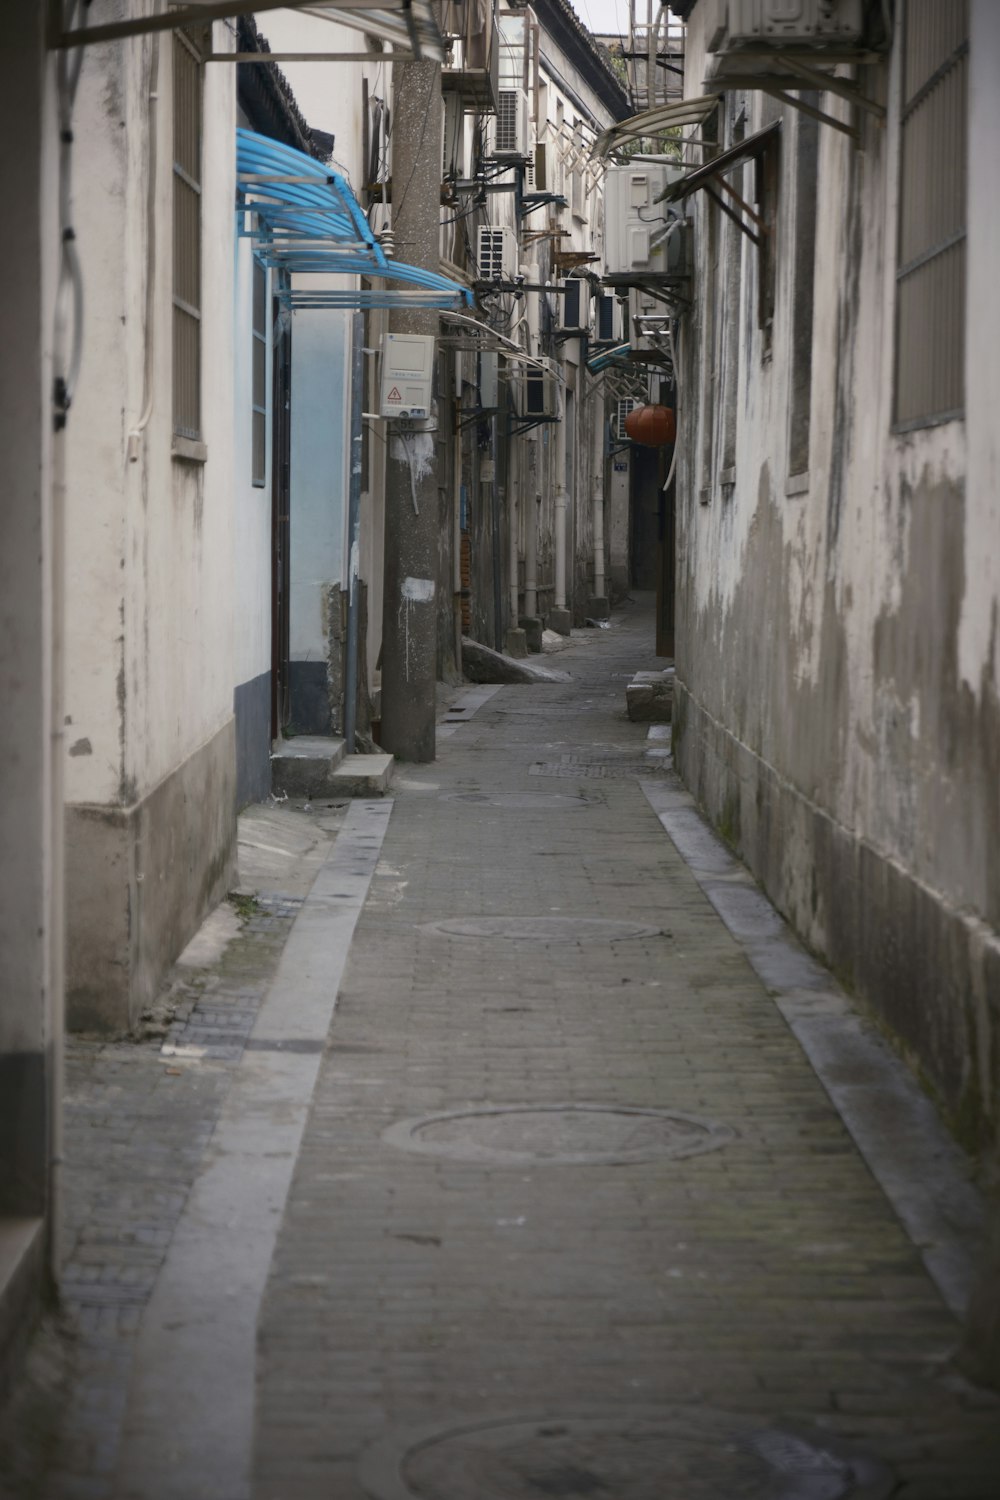 a narrow alley way with buildings on both sides